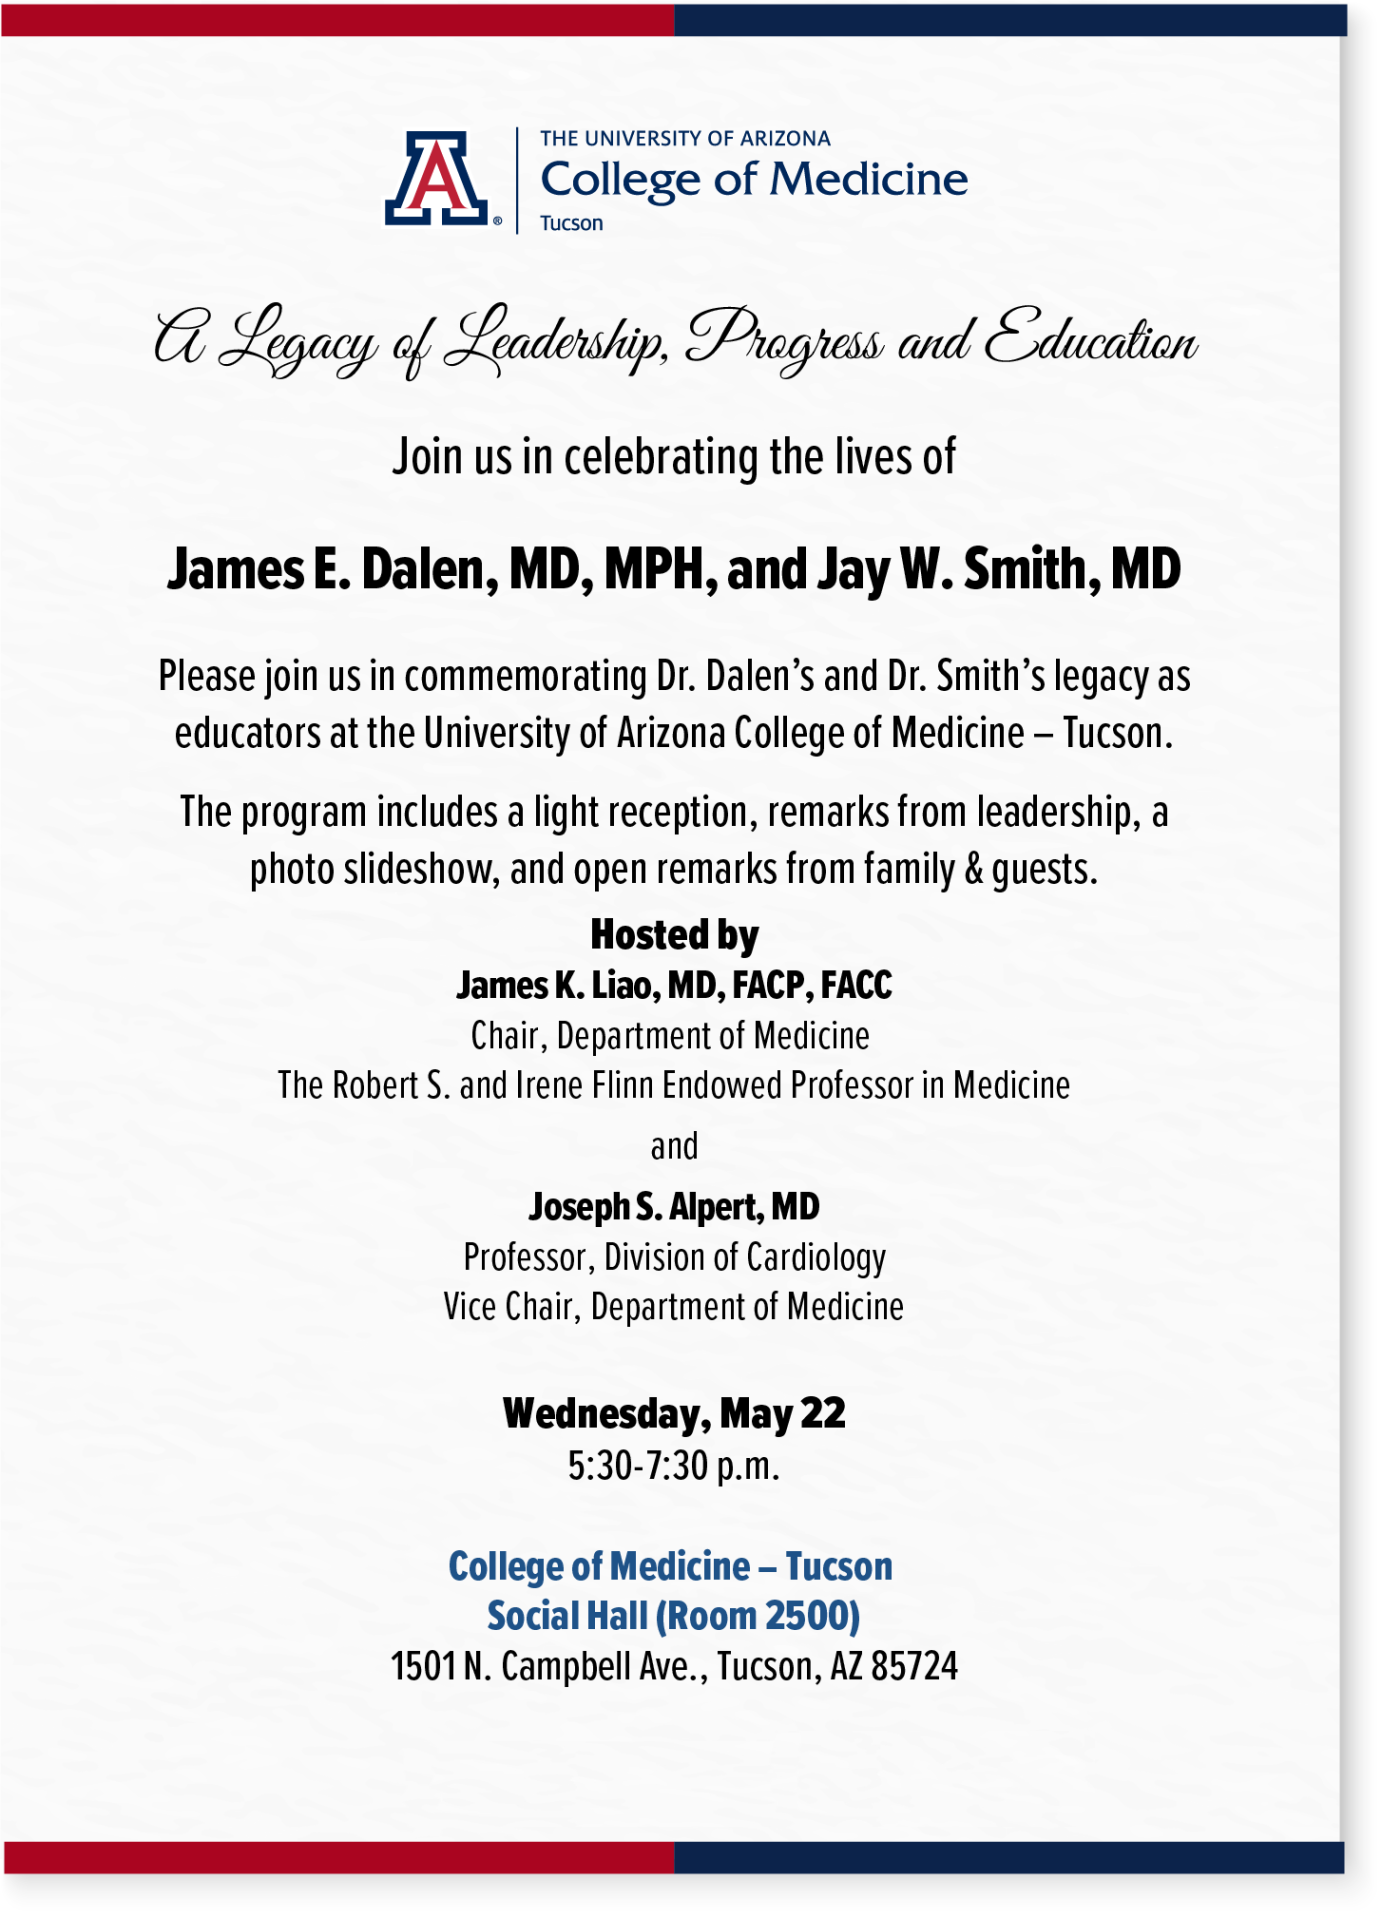 [Invitation to Memorial Event for Drs. James E. Dalen and Jay W. Smith, University of Arizona College of Medicine – Tucson]